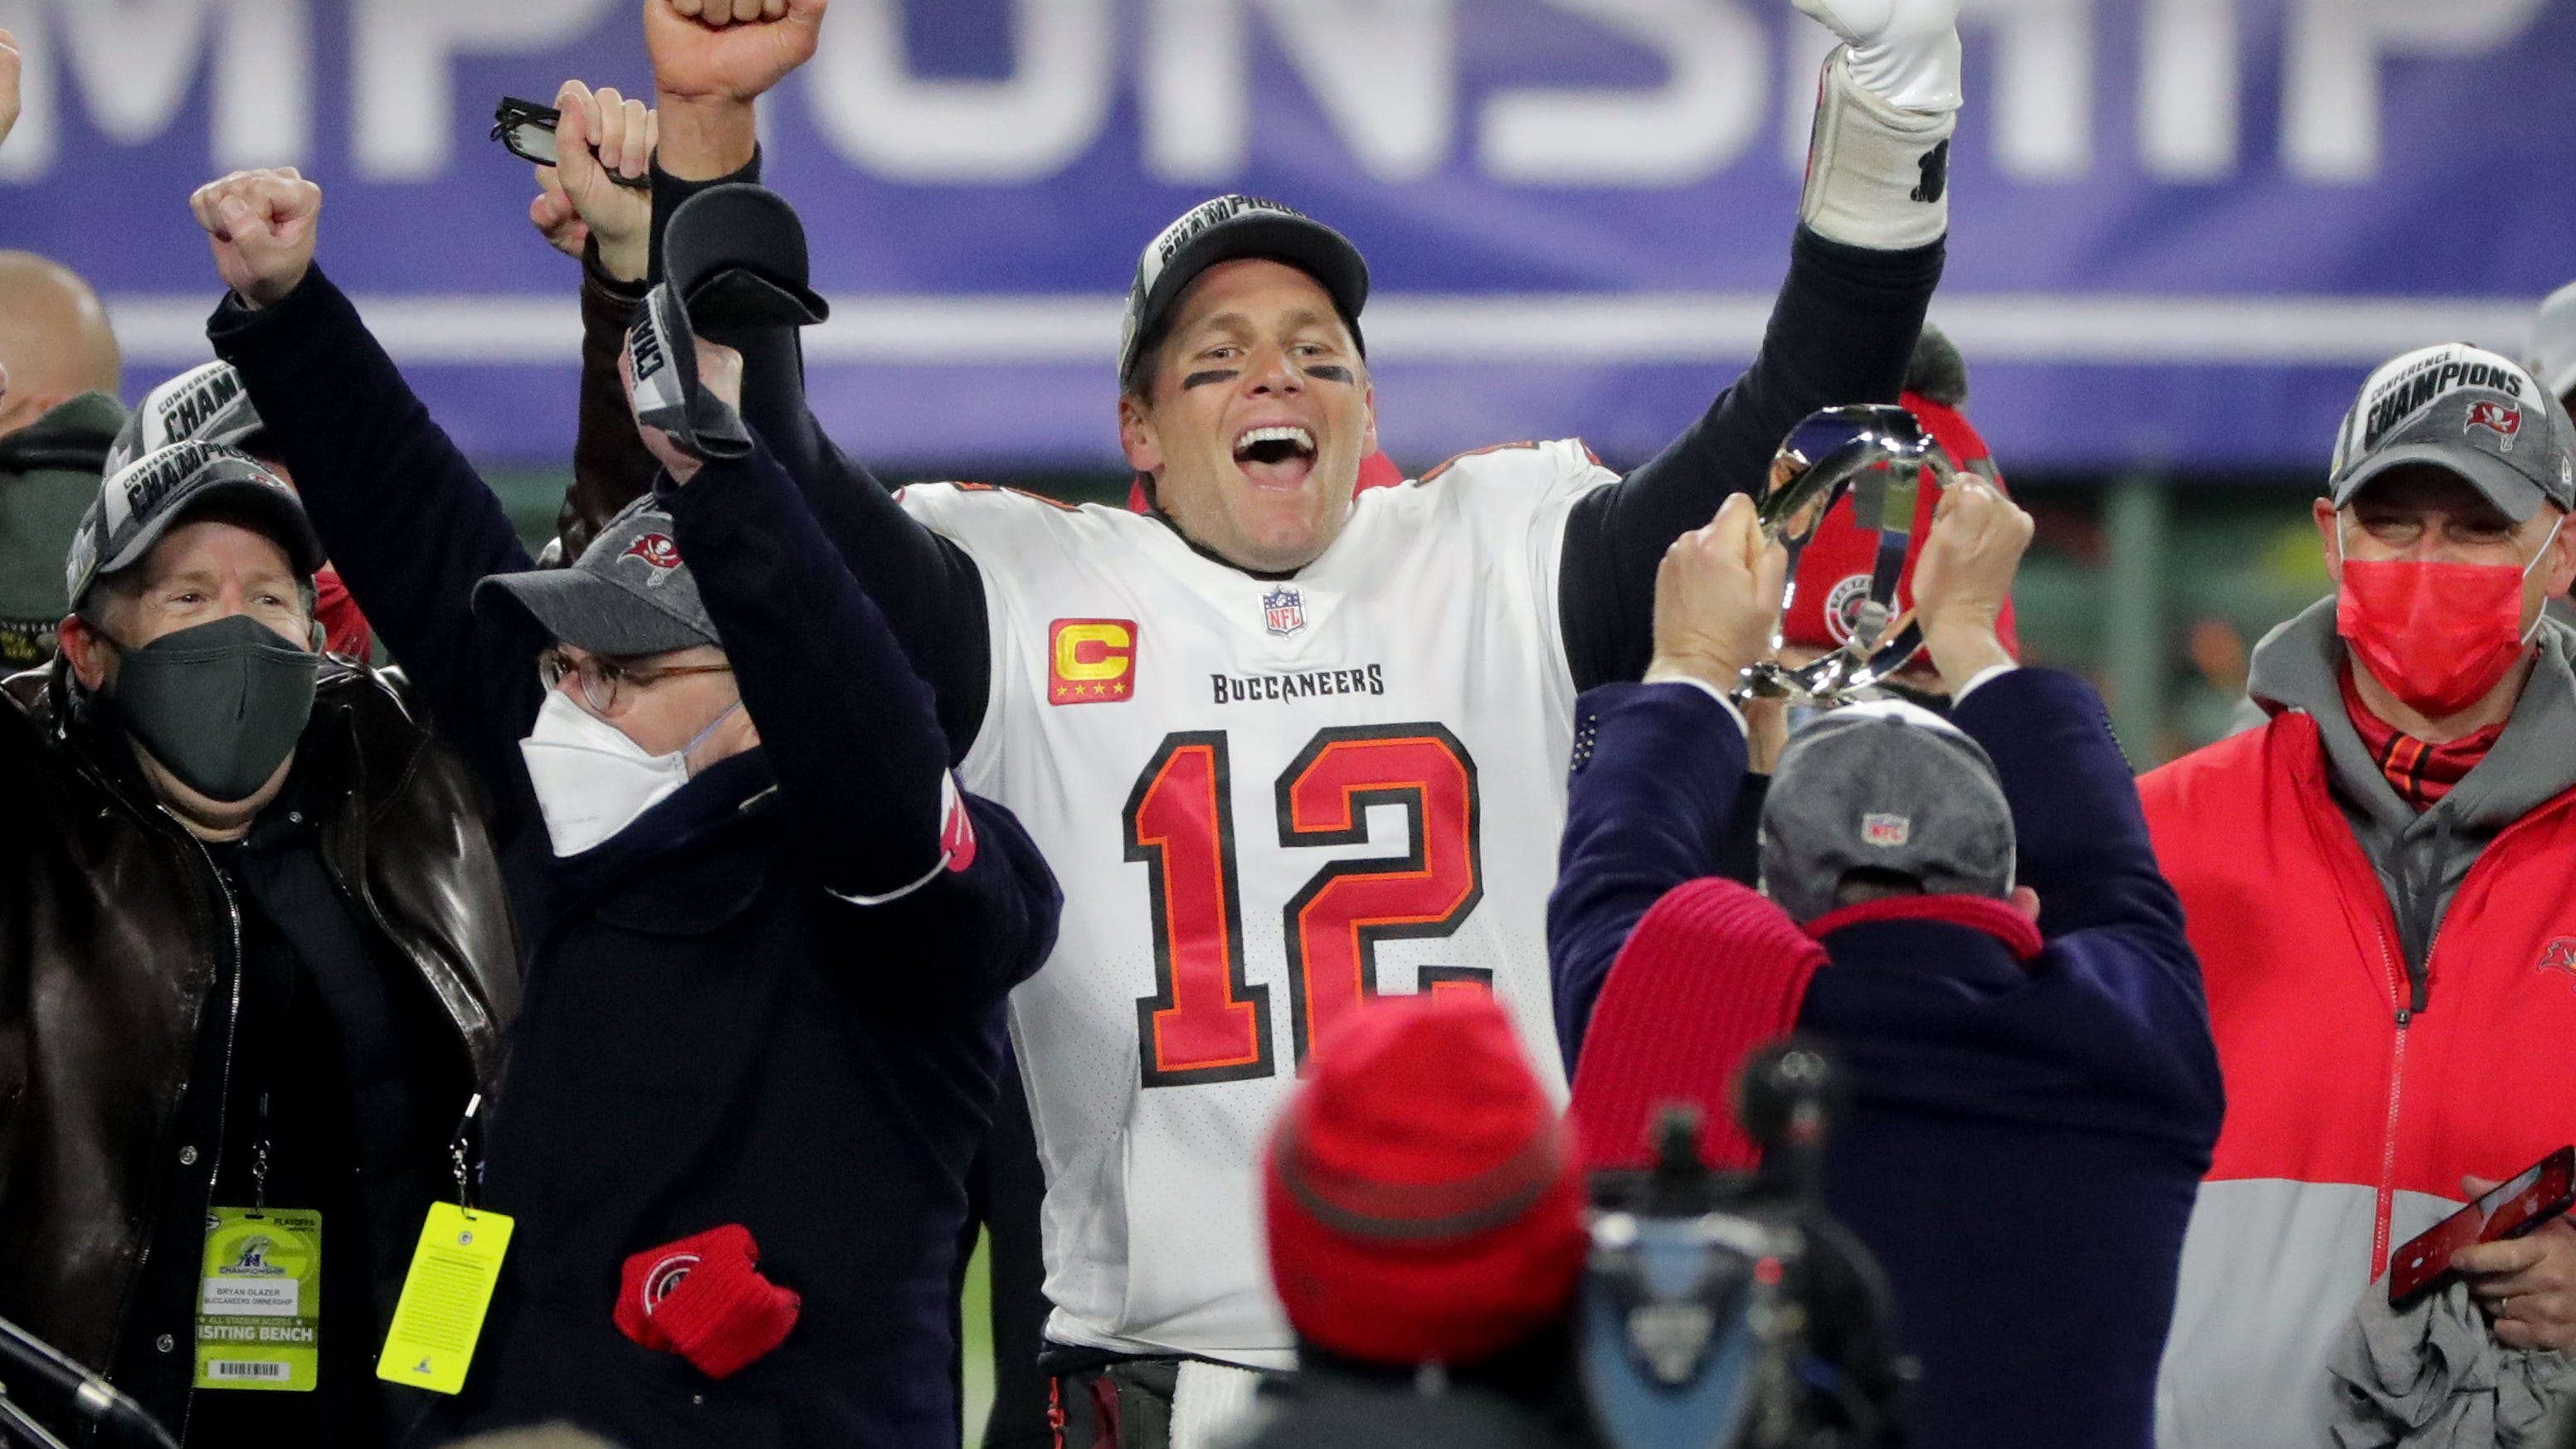 Tom Brady Sr. expects Buccaneers will beat Patriots in NFL Week 4